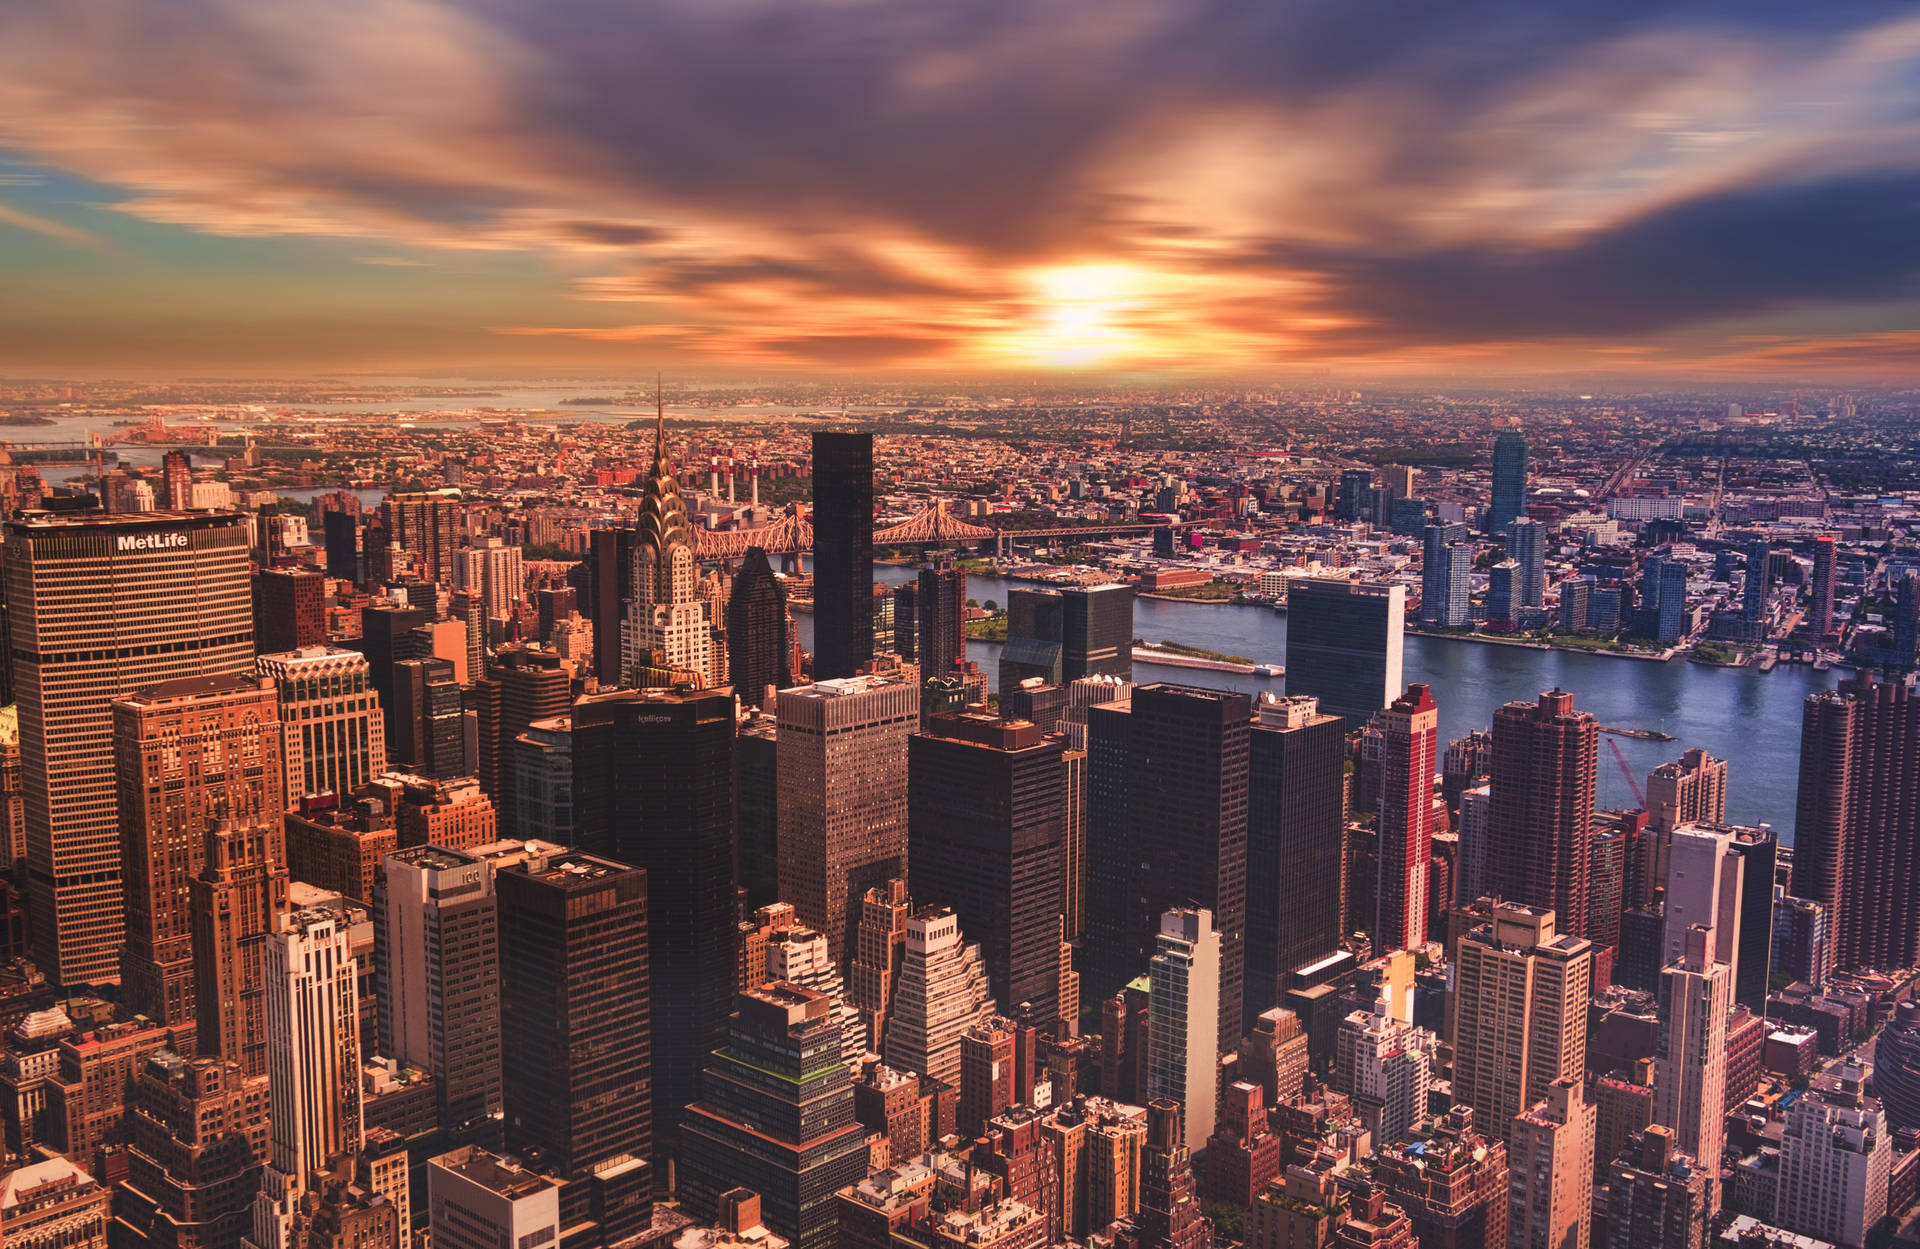 The iconic New York skyline silhouetted at sunset. Wallpaper